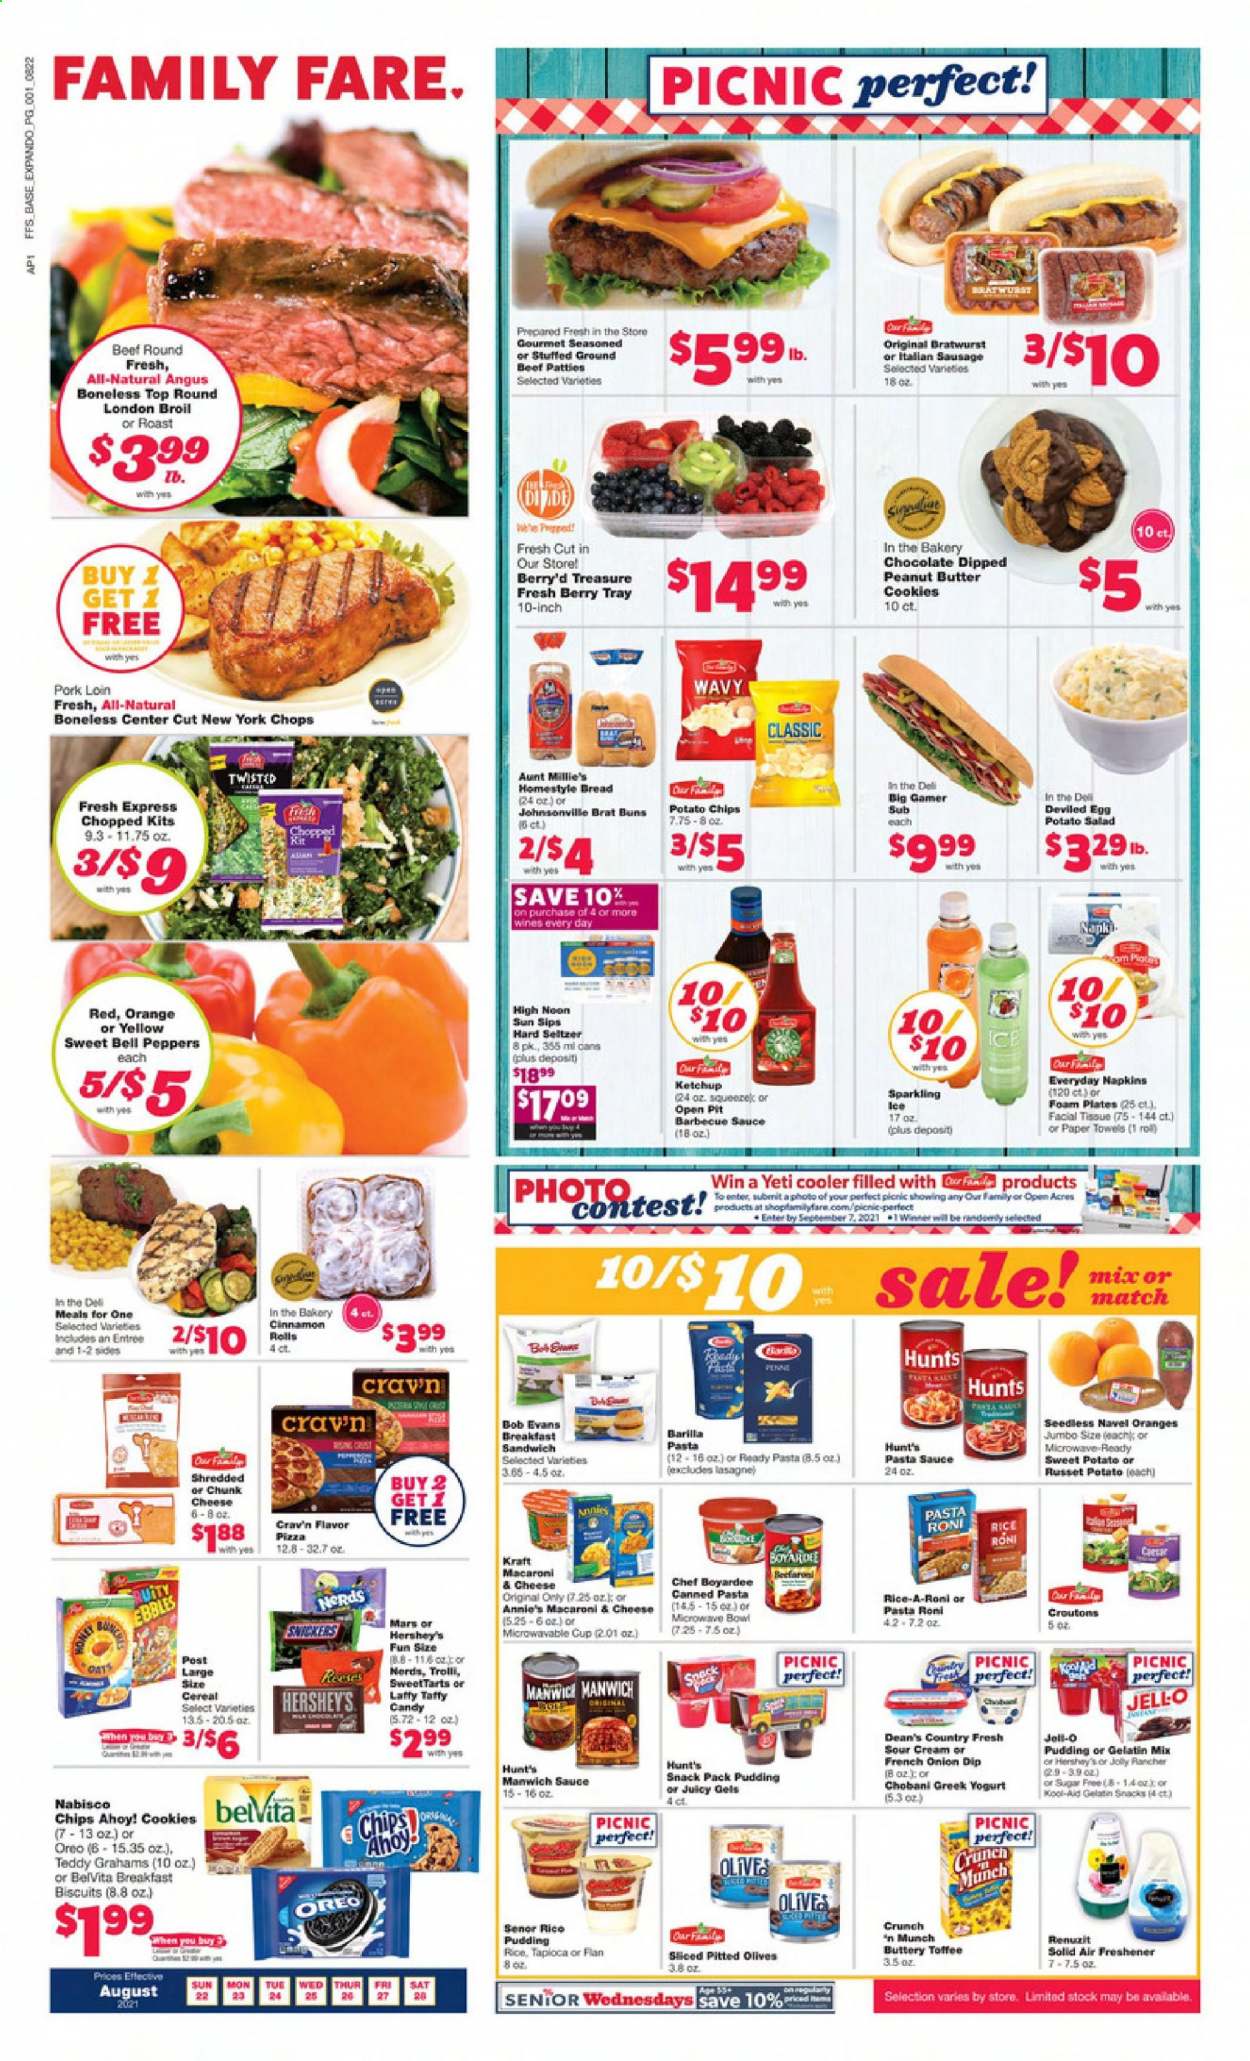 thumbnail - Family Fare Flyer - 08/22/2021 - 08/28/2021 - Sales products - bread, buns, bell peppers, russet potatoes, sweet potato, salad, peppers, oranges, macaroni & cheese, pizza, pasta sauce, sauce, Barilla, Annie's, Kraft®, Bob Evans, Johnsonville, bratwurst, sausage, italian sausage, potato salad, chunk cheese, greek yoghurt, Oreo, yoghurt, Chobani, rice pudding, eggs, sour cream, dip, Reese's, Hershey's, cookies, chocolate, butter cookies, Trolli, Mars, toffee, biscuit, Chips Ahoy!, potato chips, chips, croutons, Jell-O, olives, Manwich, Chef Boyardee, cereals, belVita, penne, cinnamon, BBQ sauce, ketchup, Hard Seltzer, beef meat, ground beef, pork loin, pork meat, tissues, kitchen towels, paper towels, plate, cup, Renuzit, air freshener, foam plates, navel oranges. Page 1.